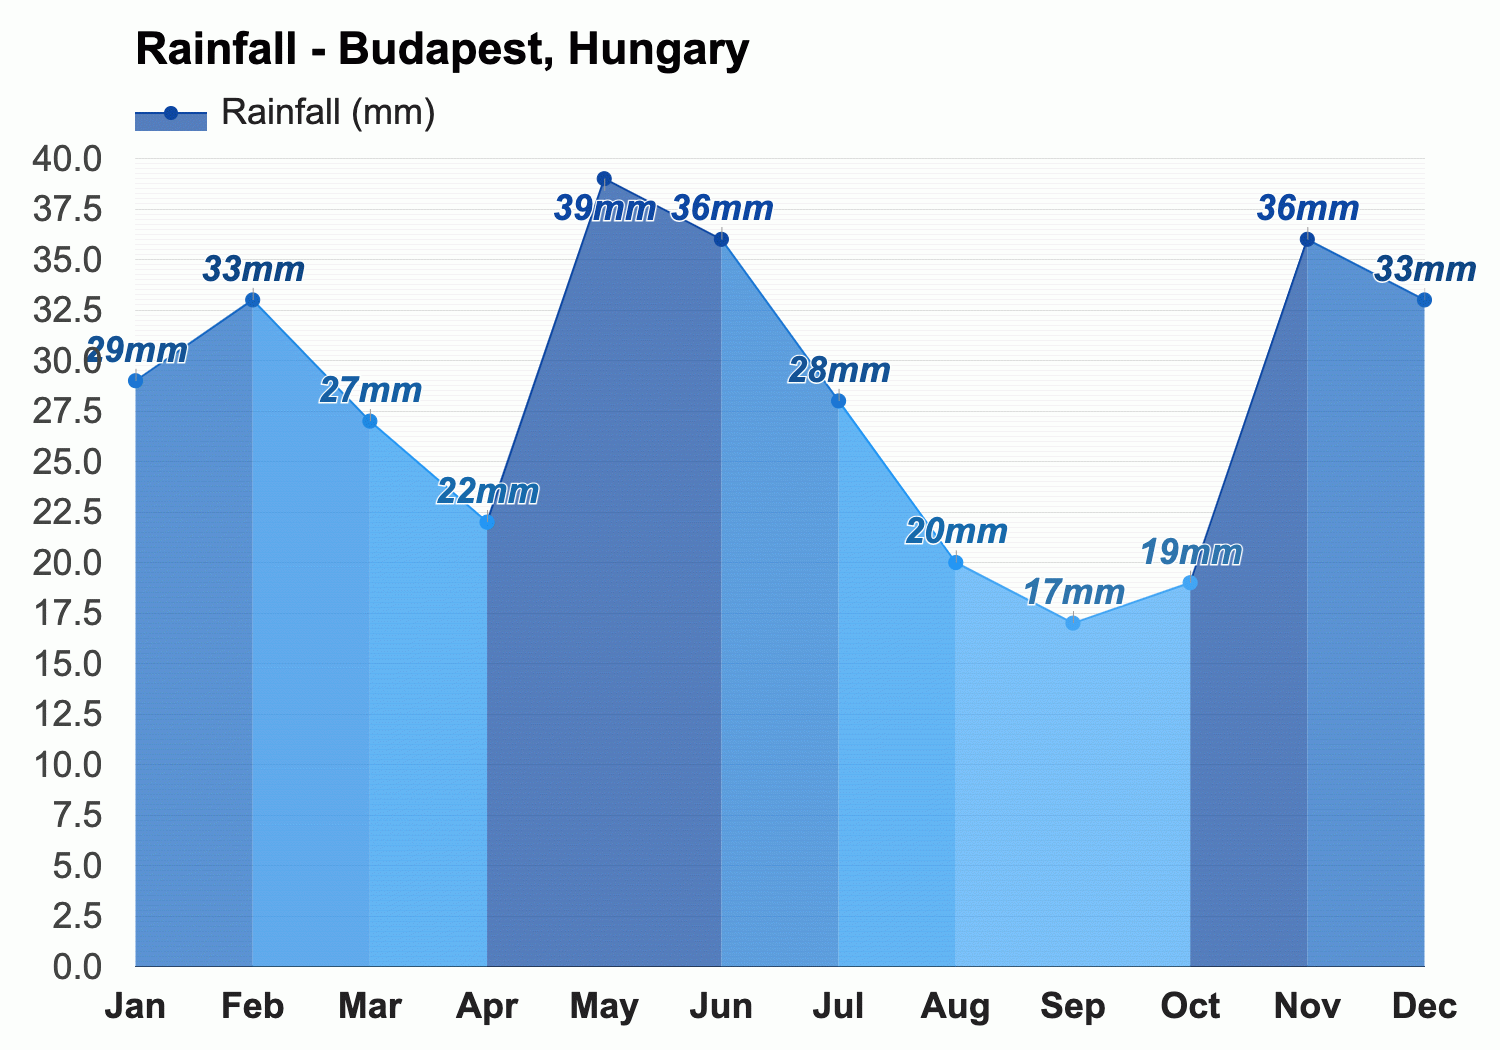 Budapest, Hungary - Climate & Monthly weather forecast